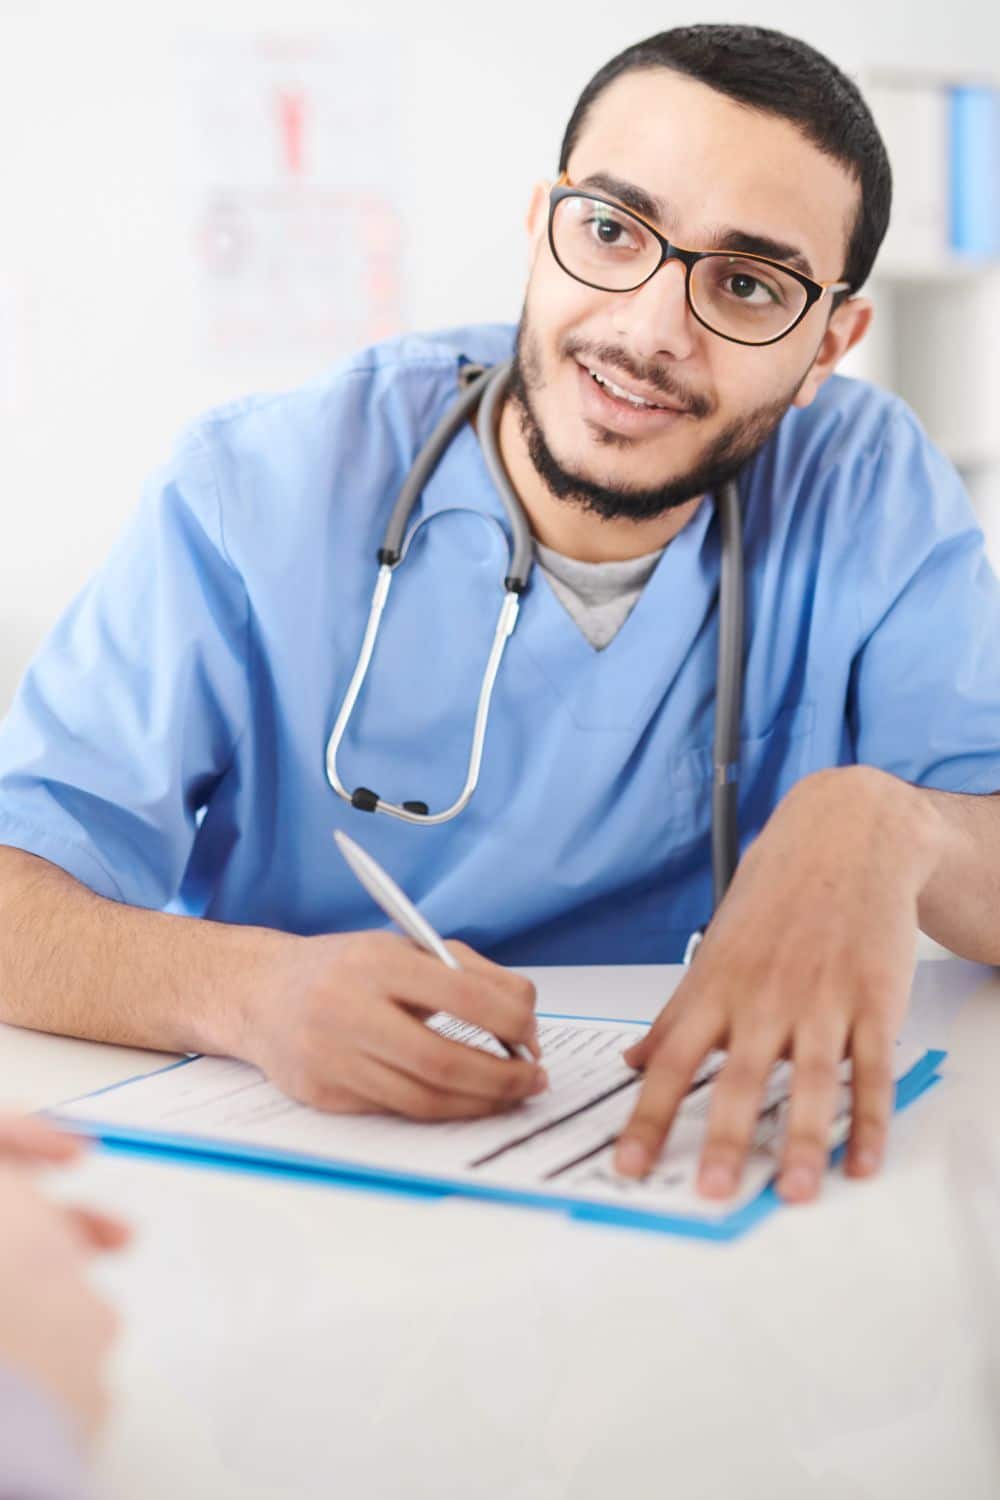 Nurse wearing glasses sitting at desk in office and listening intently to patient while making notes